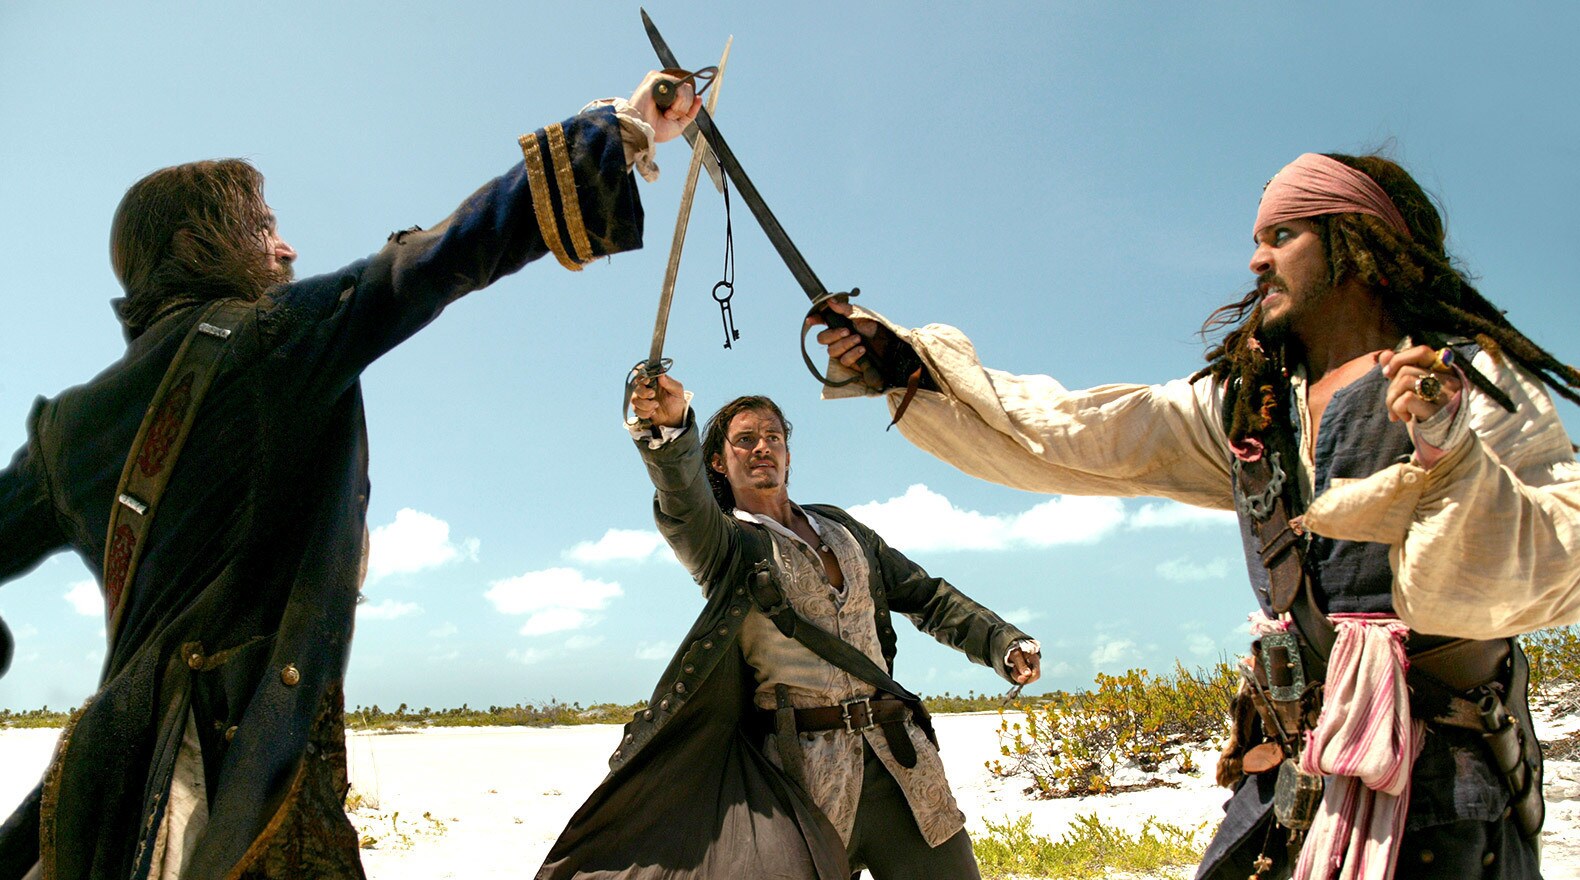 Captain Jack, Will, and Norrington each want the heart of Davy Jones.